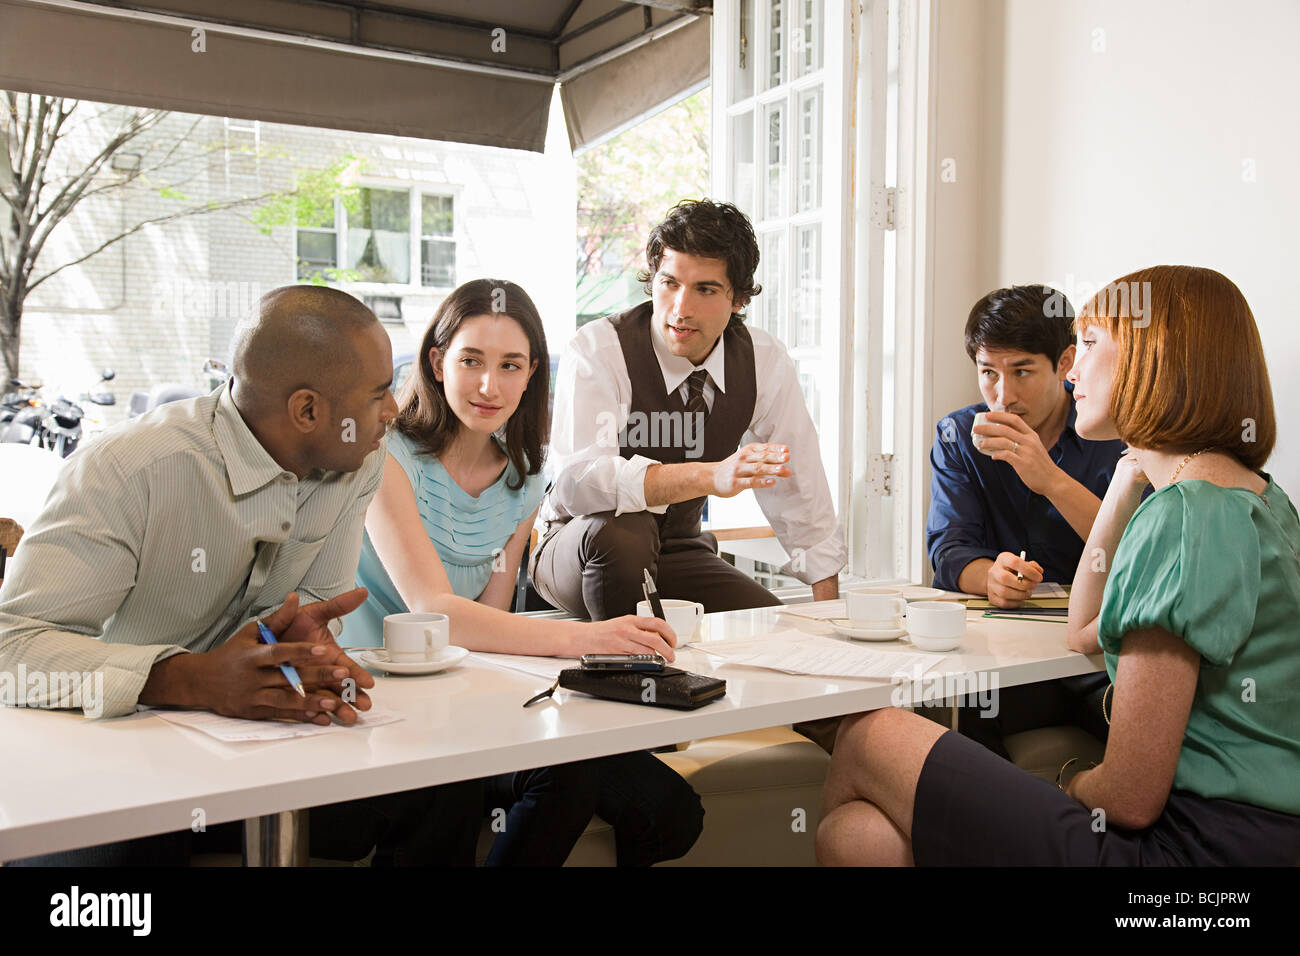 Colleagues meeting in a cafe Stock Photo